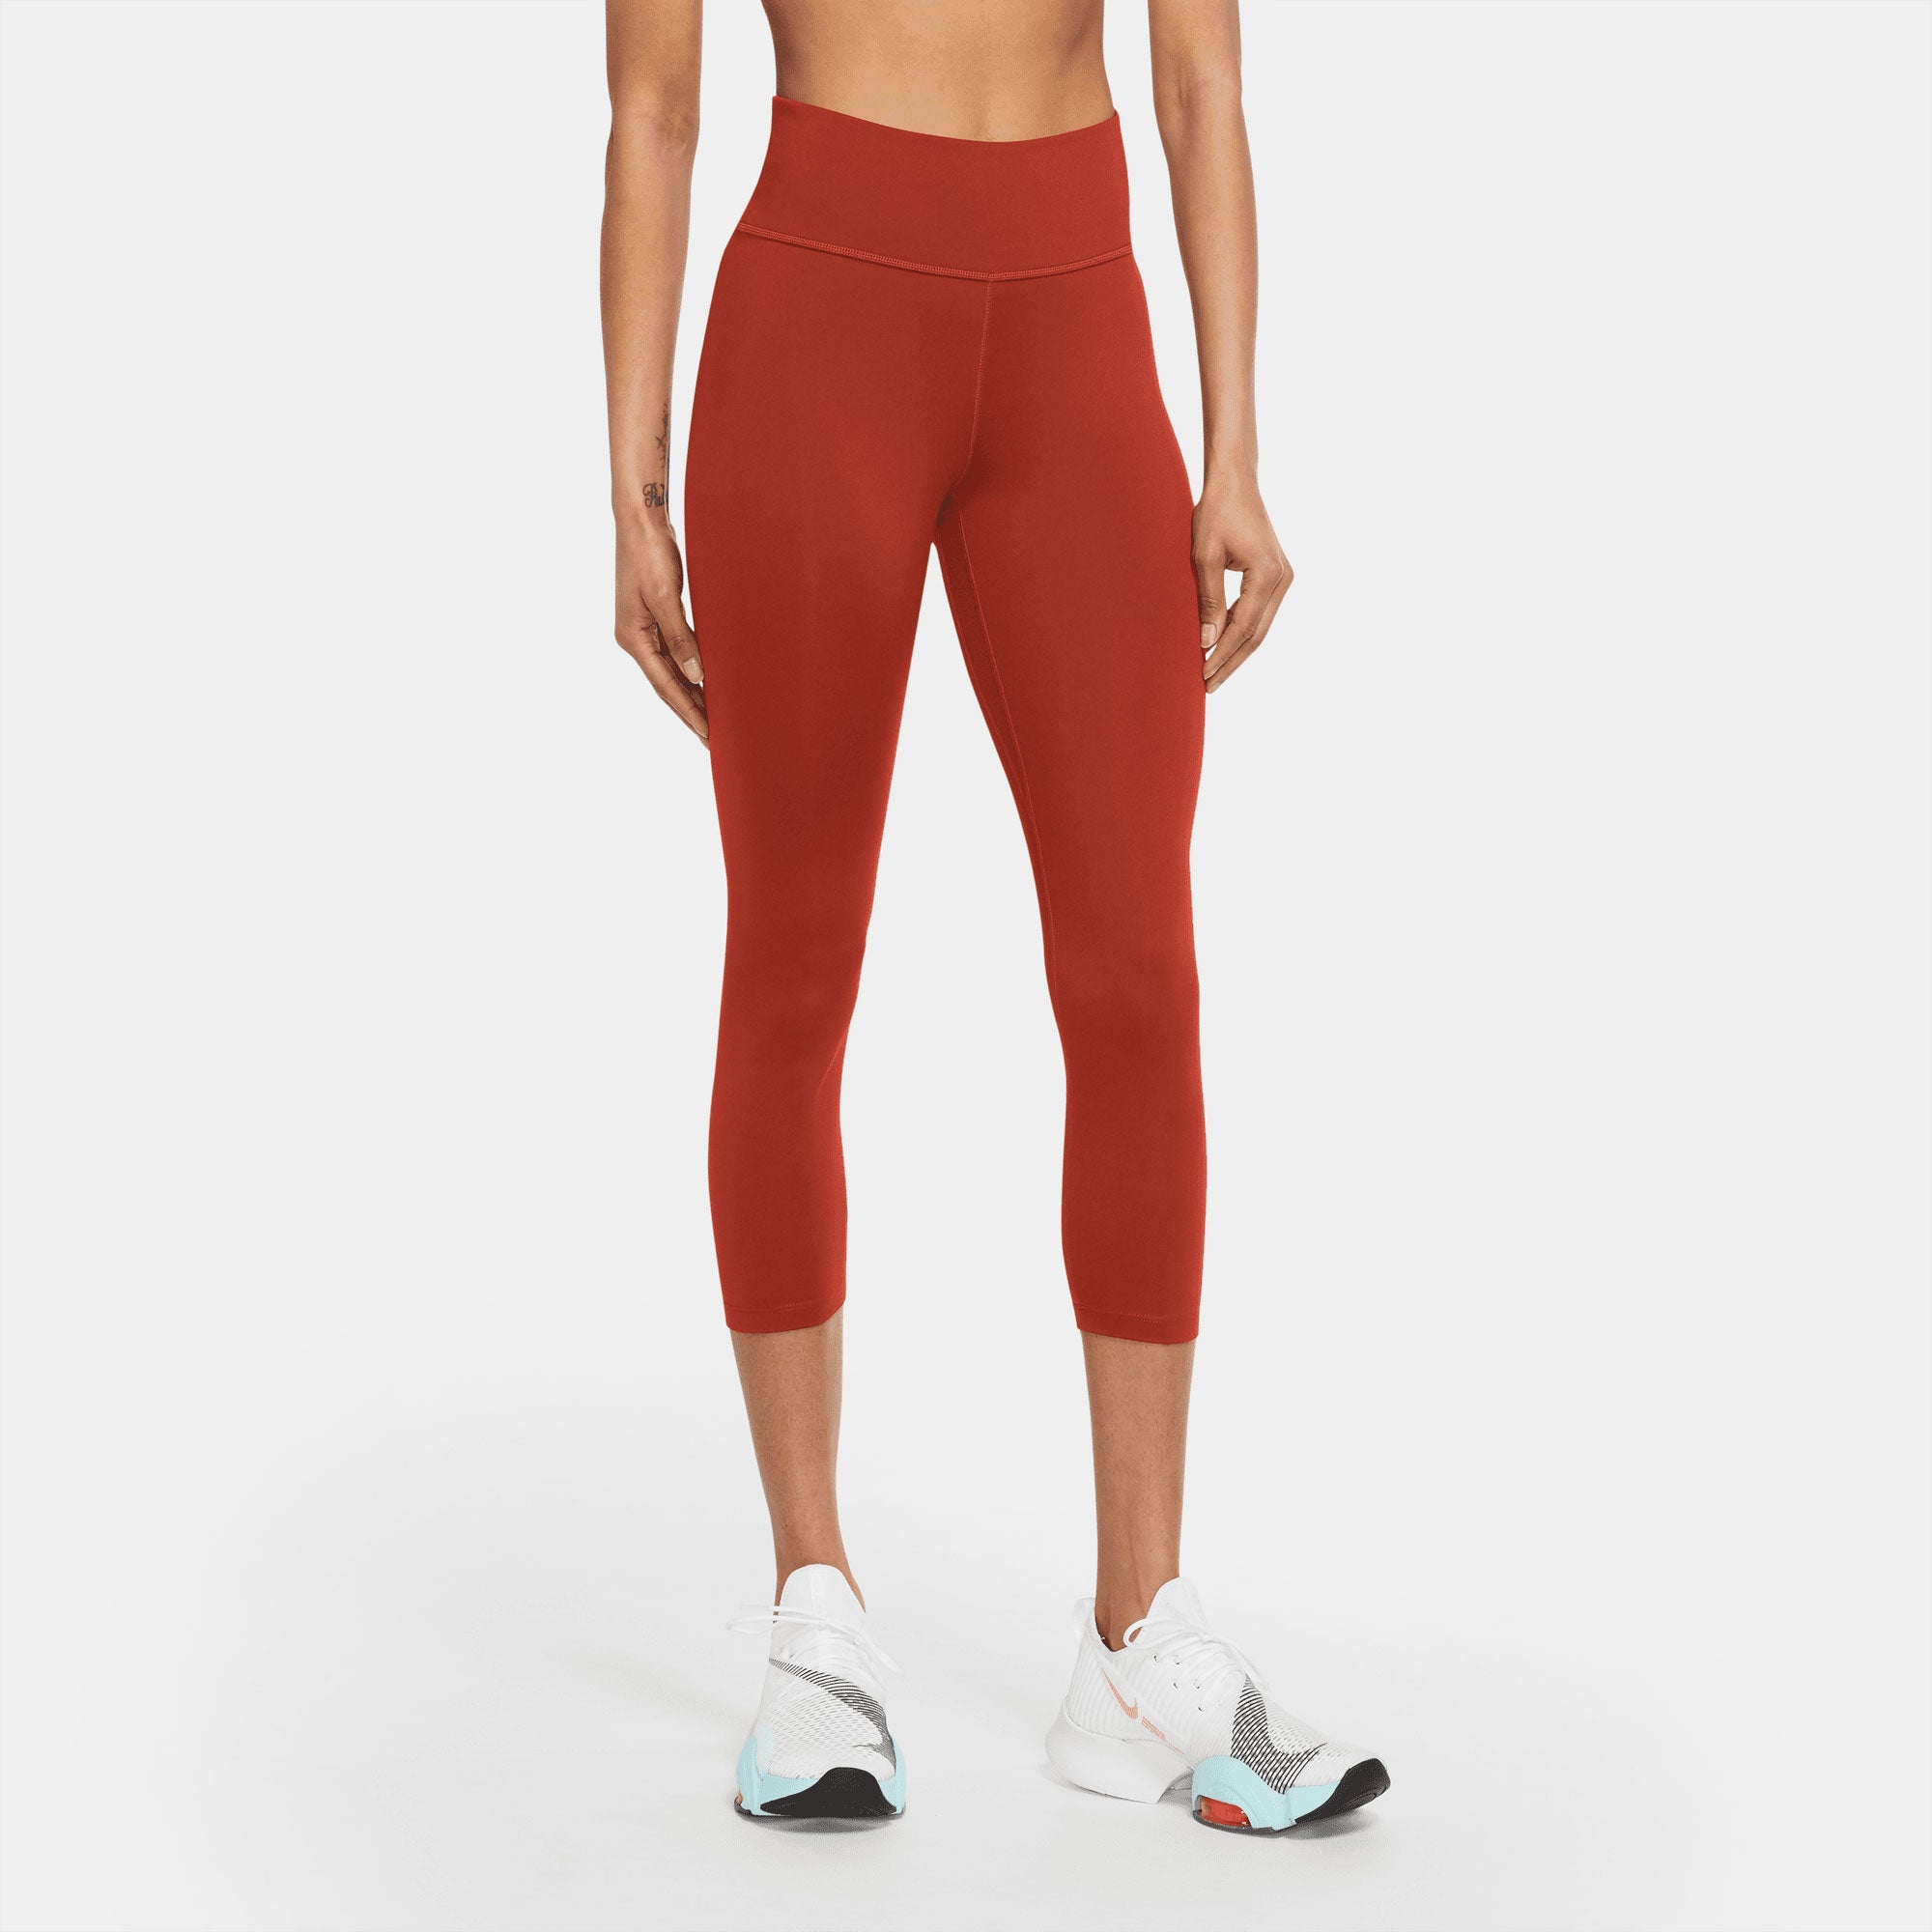 Nike One Dri-FIT Women's Mid-Rise Crop Tights Red (1)